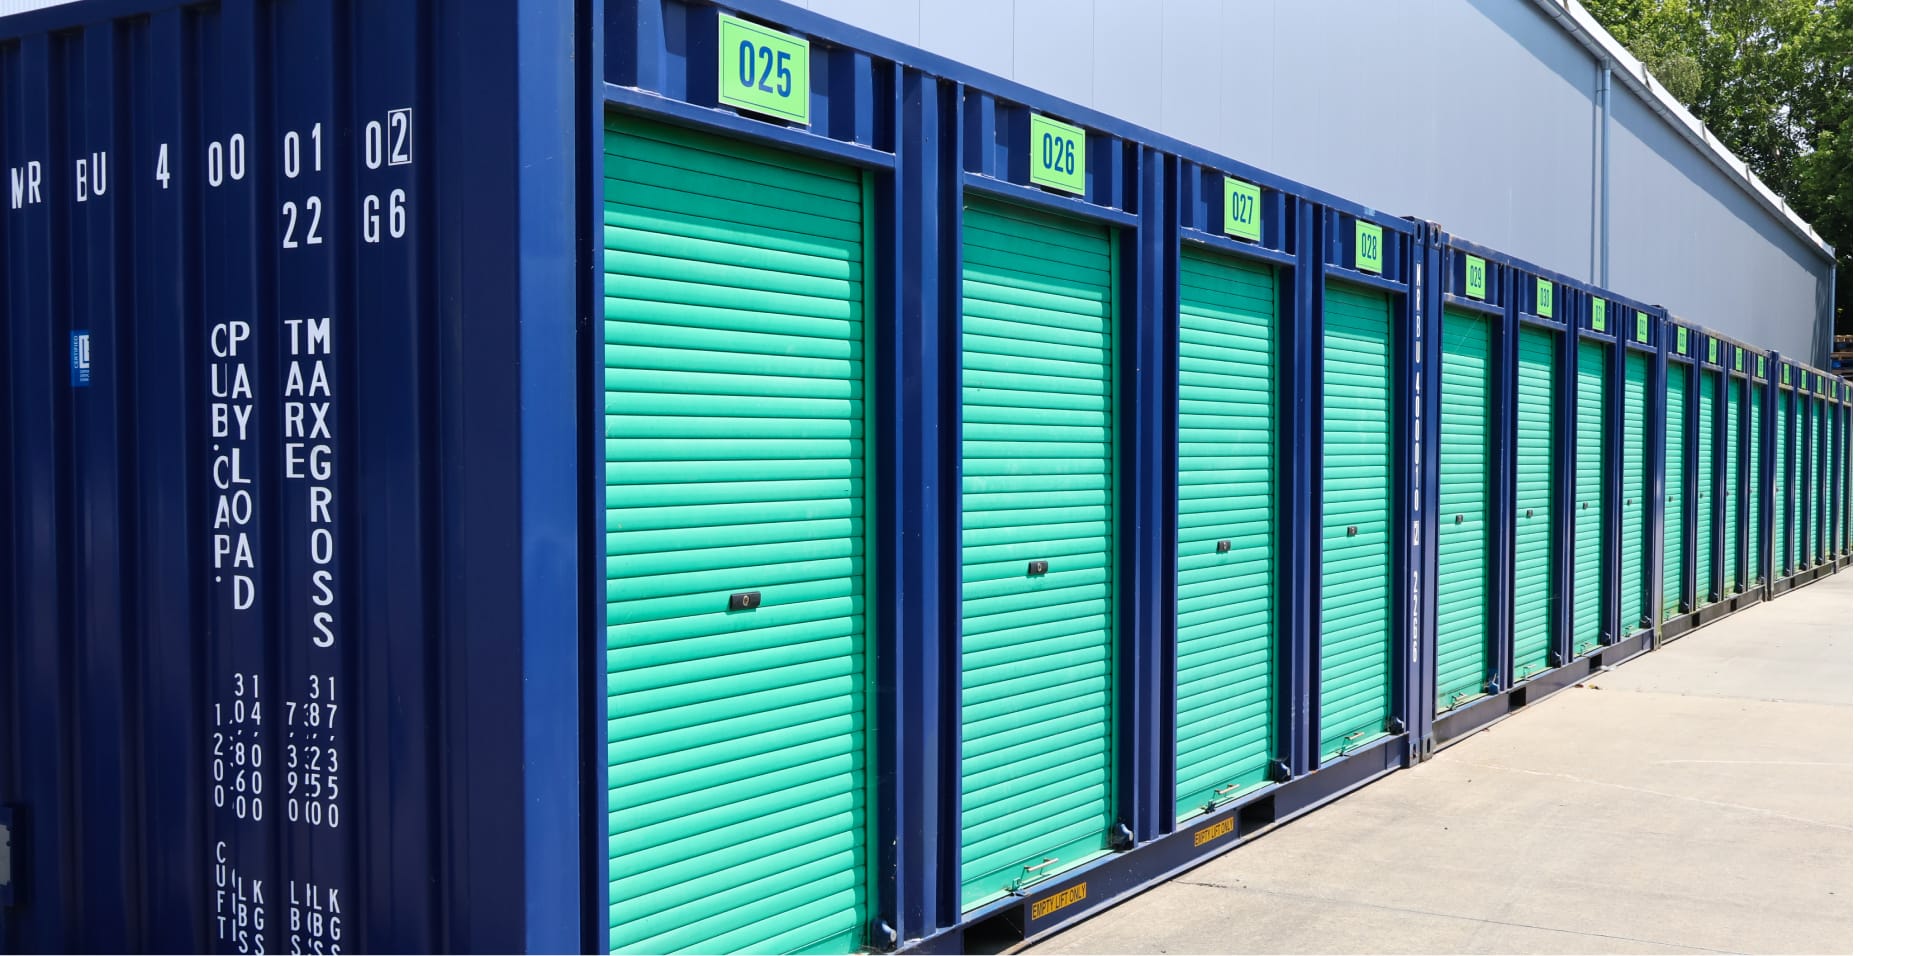 a row of dark blue containers with fluorescent green shutter doors.